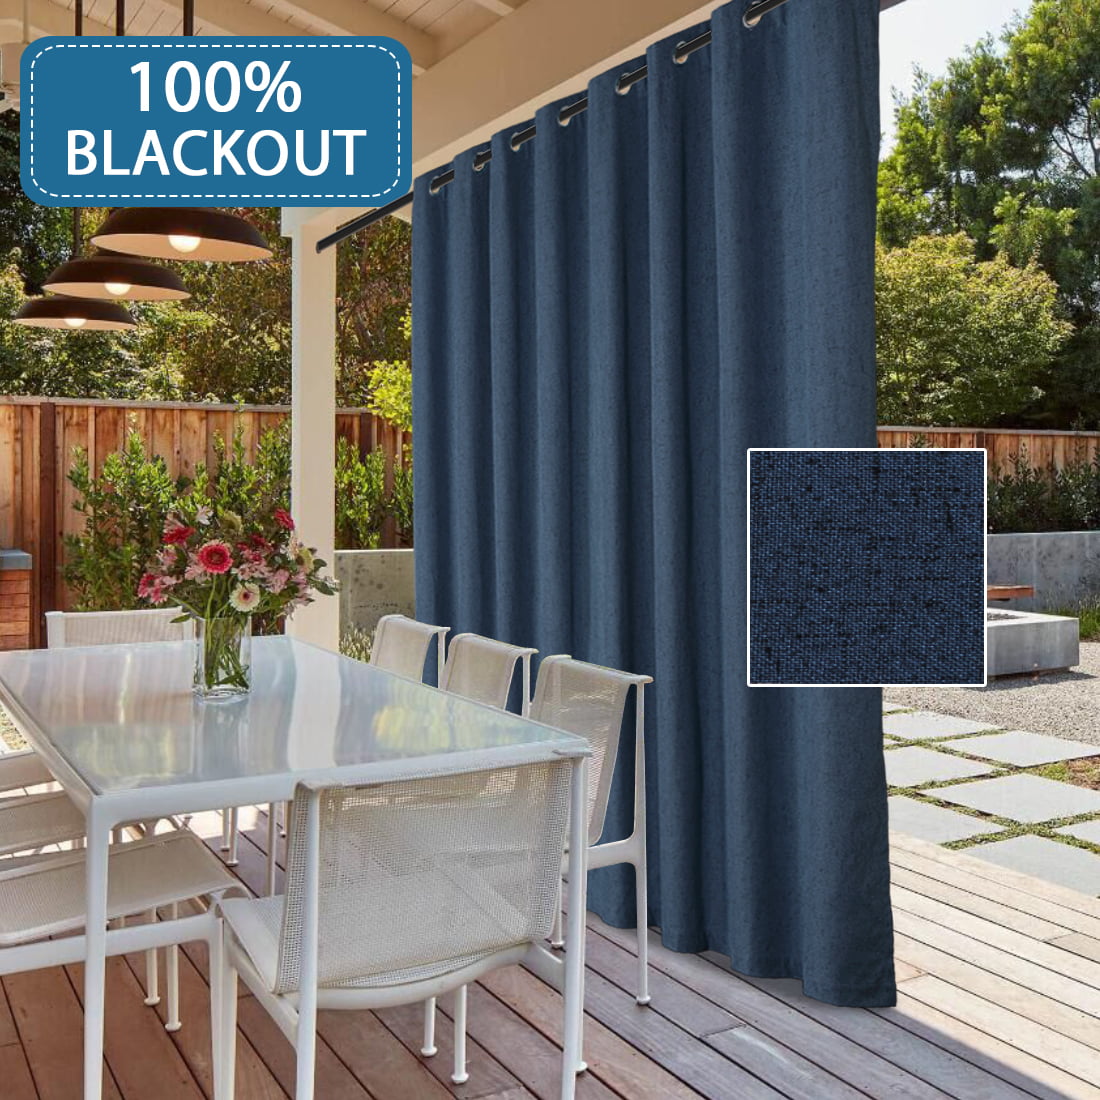 MIULEE Extra Wide Outdoor Patio Curtains Waterproof for Pergola Rustproof Grommet Top Thermal Insulated Windtight Drapery 1 PC 100 Inches by 84 Inches Teal 